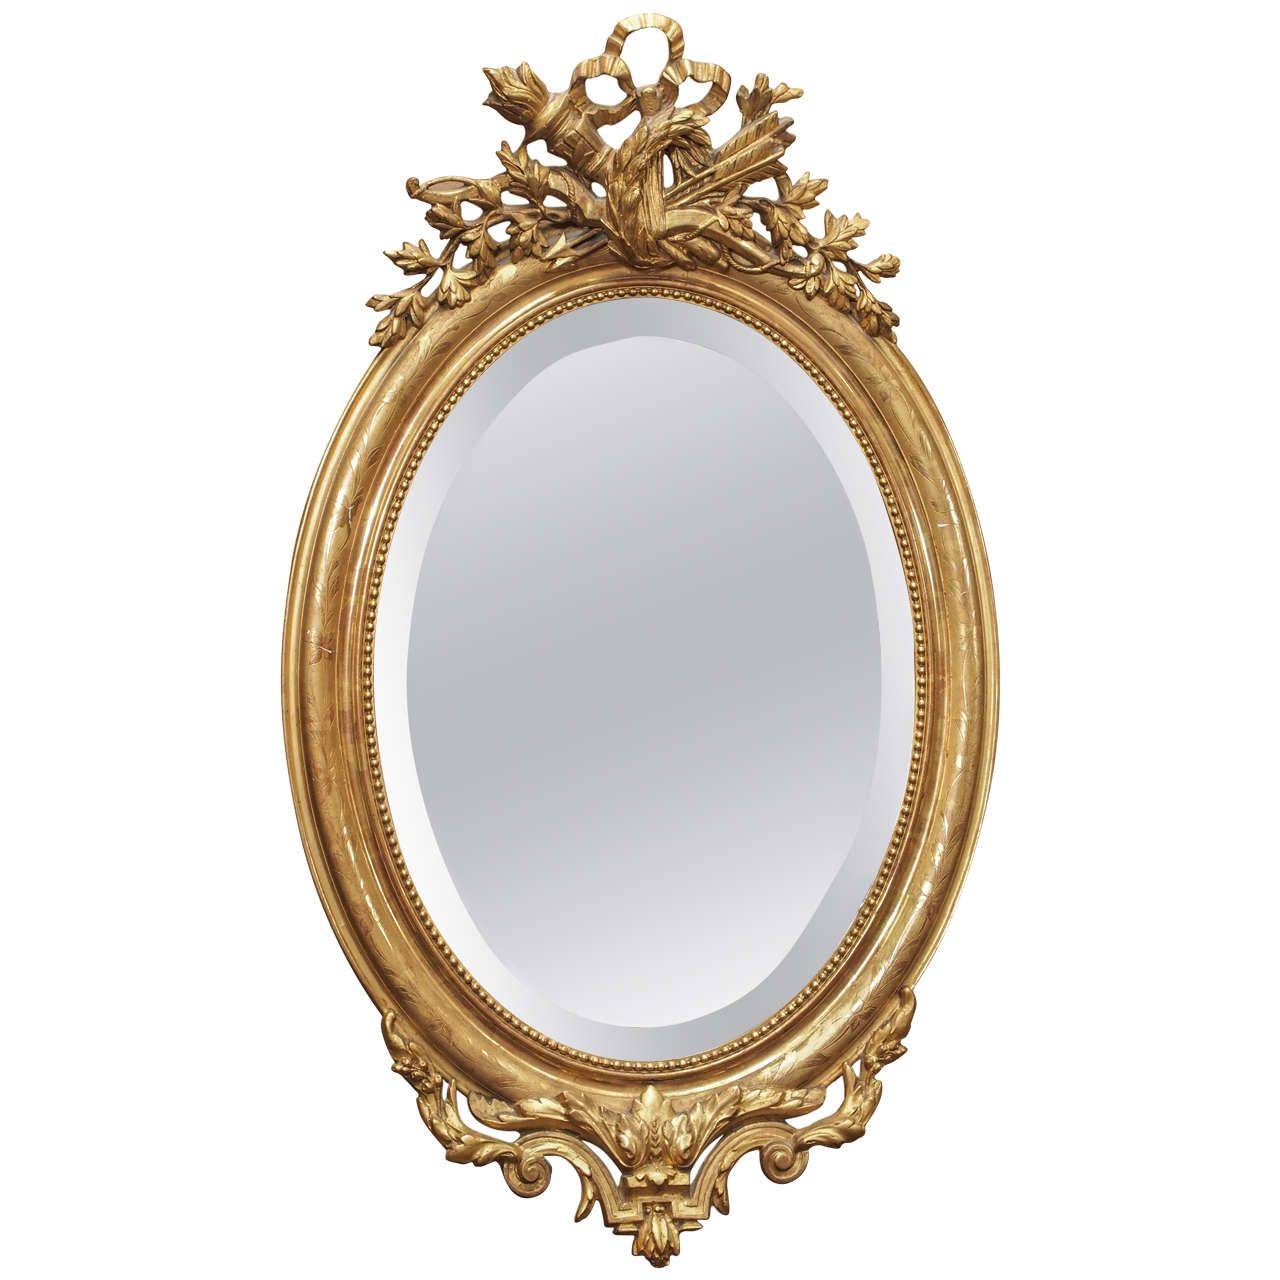 Lovely Oval Antique French Gold Beveled Mirror Circa 1850 At 1stdibs Pertaining To Antique Gold Cut Edge Wall Mirrors (View 14 of 15)